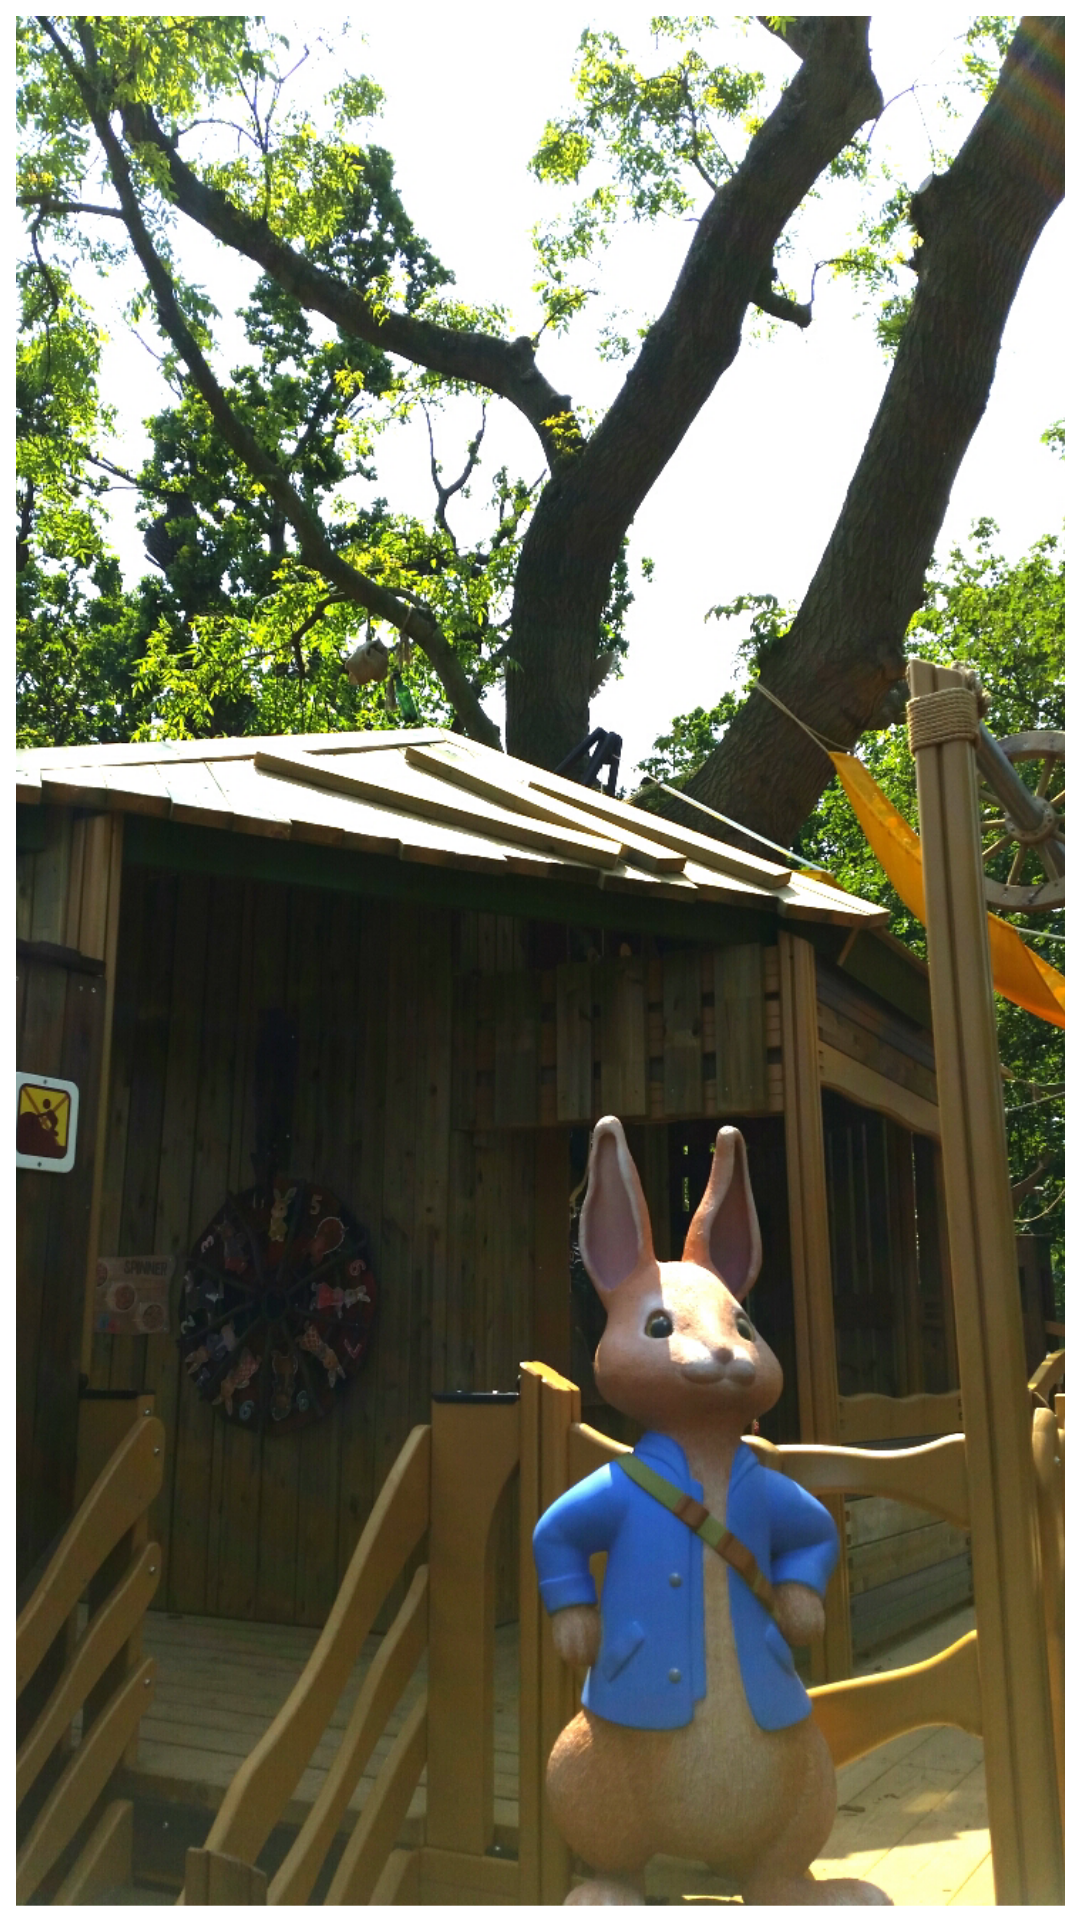 Peter Rabbit Adventure Playground, Willows Farm, Hertfordshire, places to visit, days out, Beatrix Potter